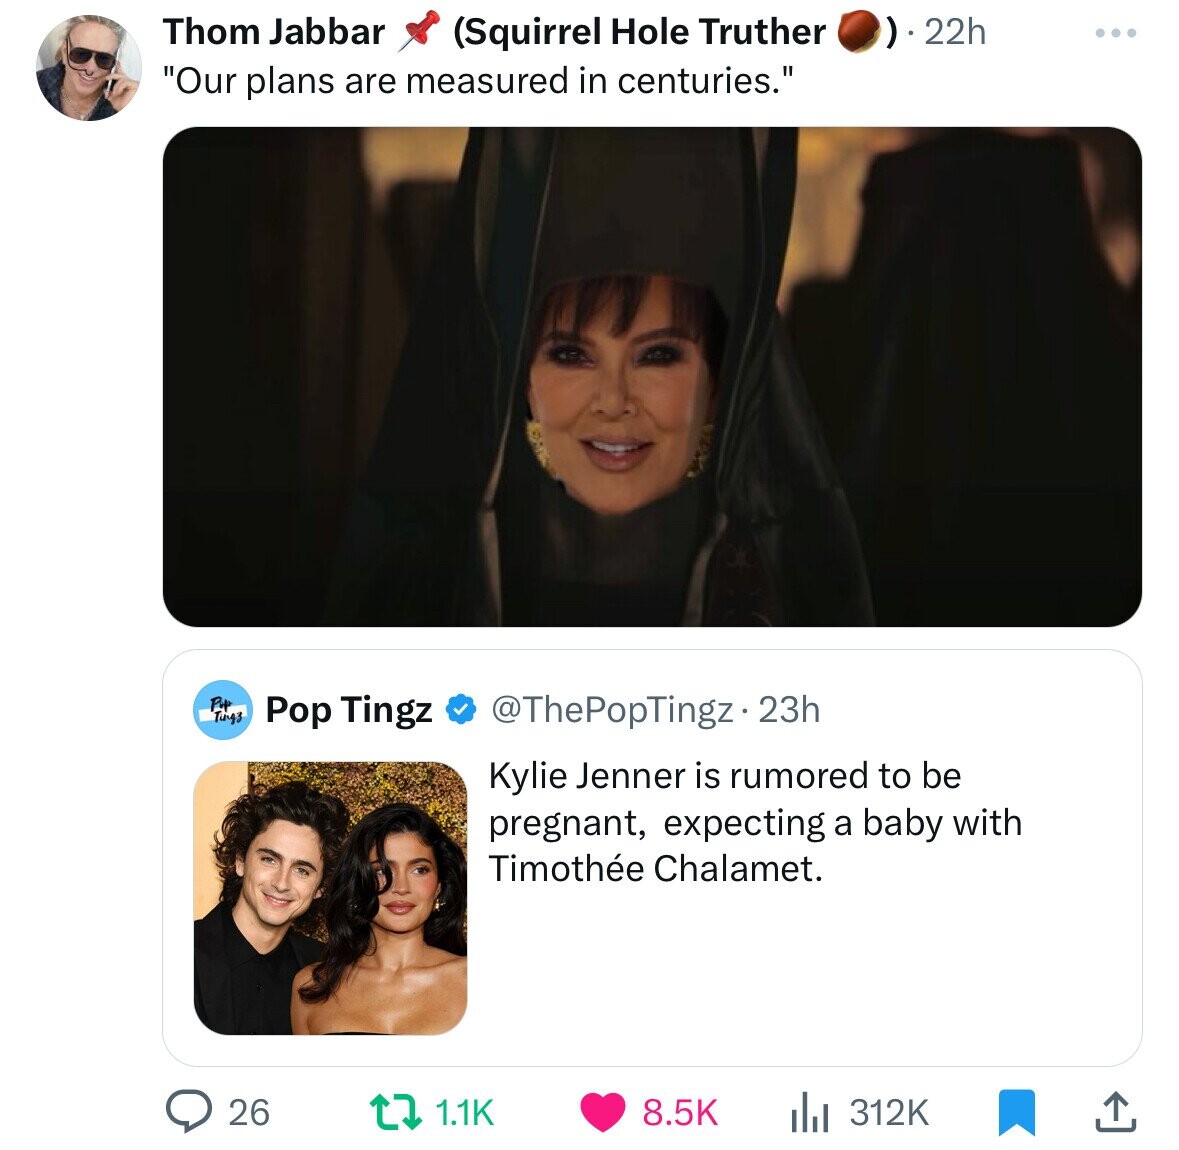 Thom Jabbar (Squirrel Hole Truther )).22h ... Our plans are measured in centuries. Pop Ting3 Pop Tingz @ThePopTingz • 23h Kylie Jenner is rumored to be pregnant, expecting a baby with Timothée Chalamet. 26 1.1K 8.5K 312K 